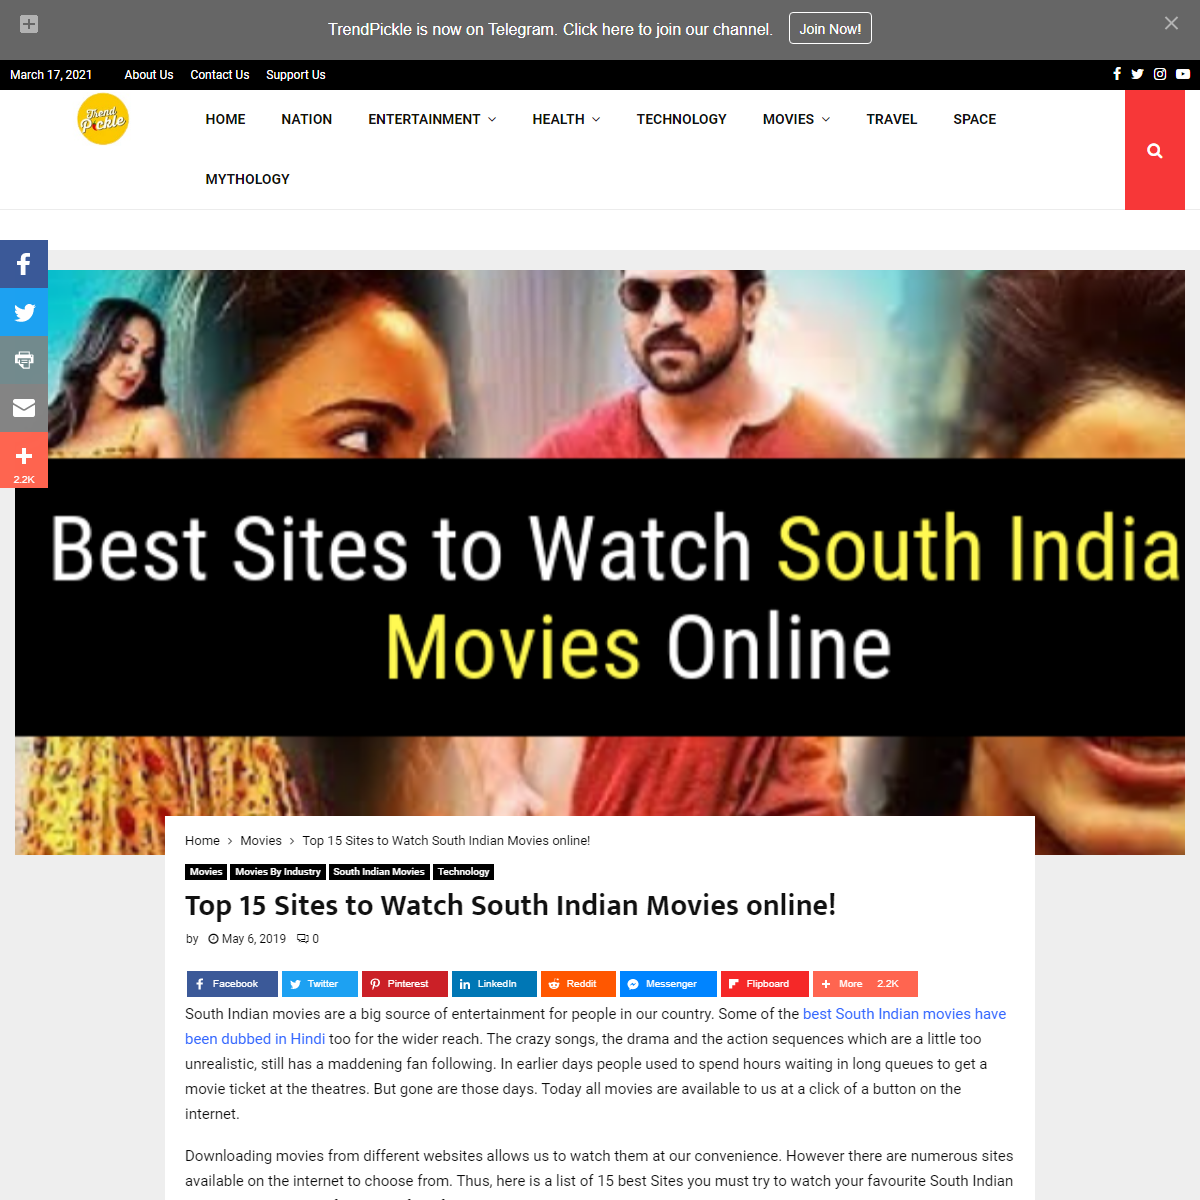 A complete backup of https://trendpickle.com/top-15-sites-to-watch-south-indian-movies-online/